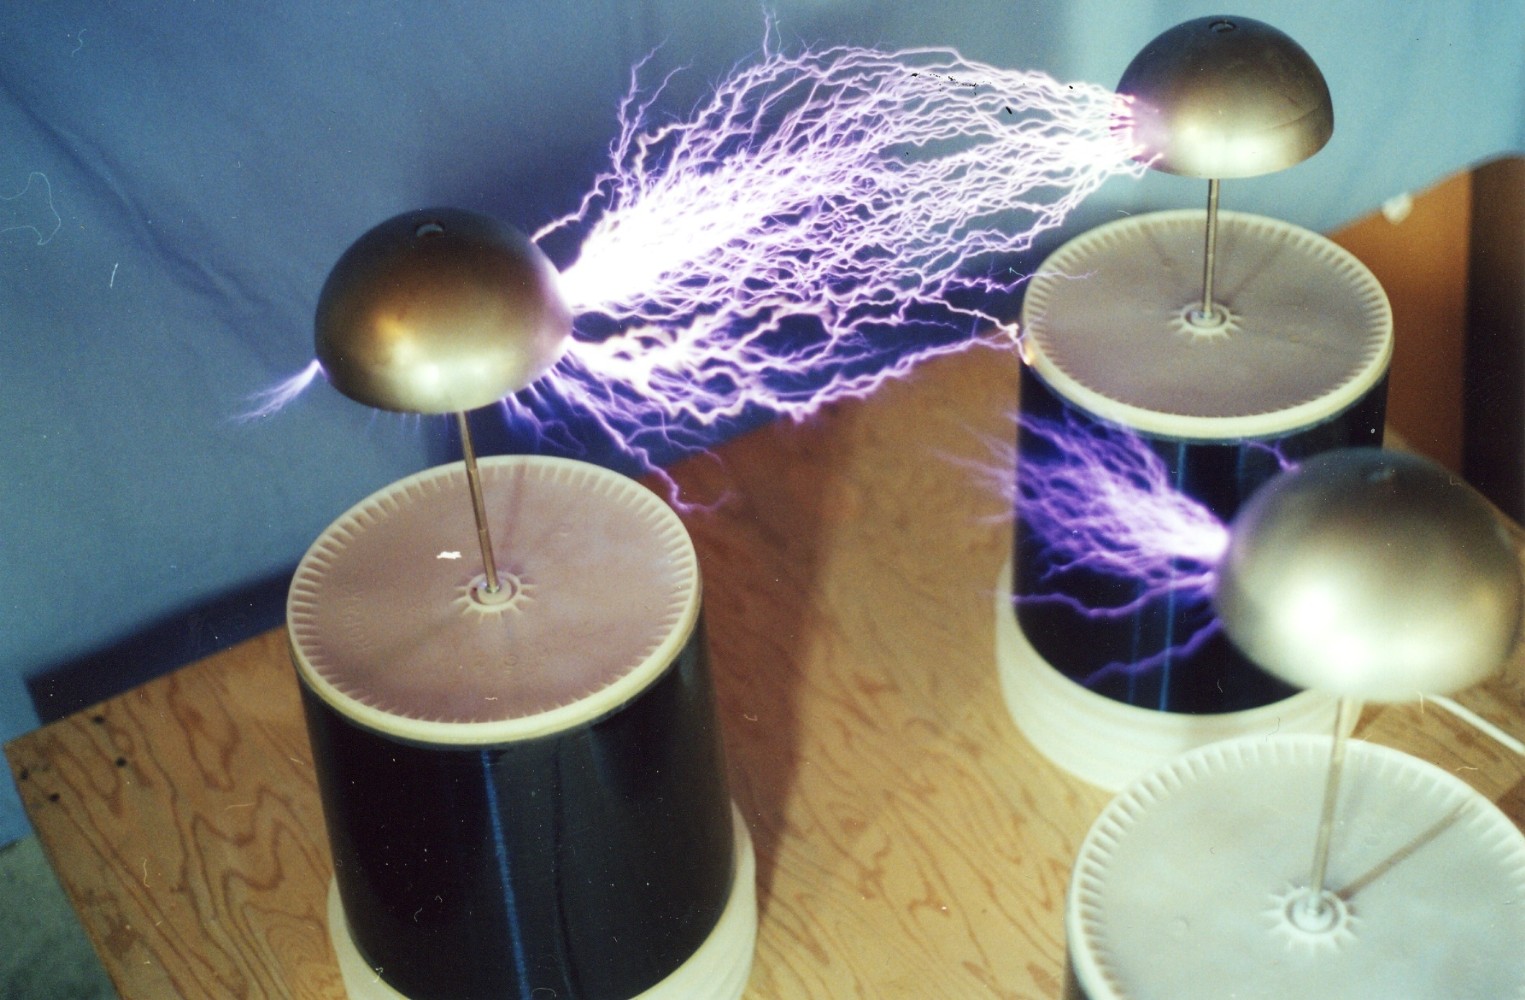 2000 3-phase Tesla coil system with 60 Hz half-wave rectified power - 2